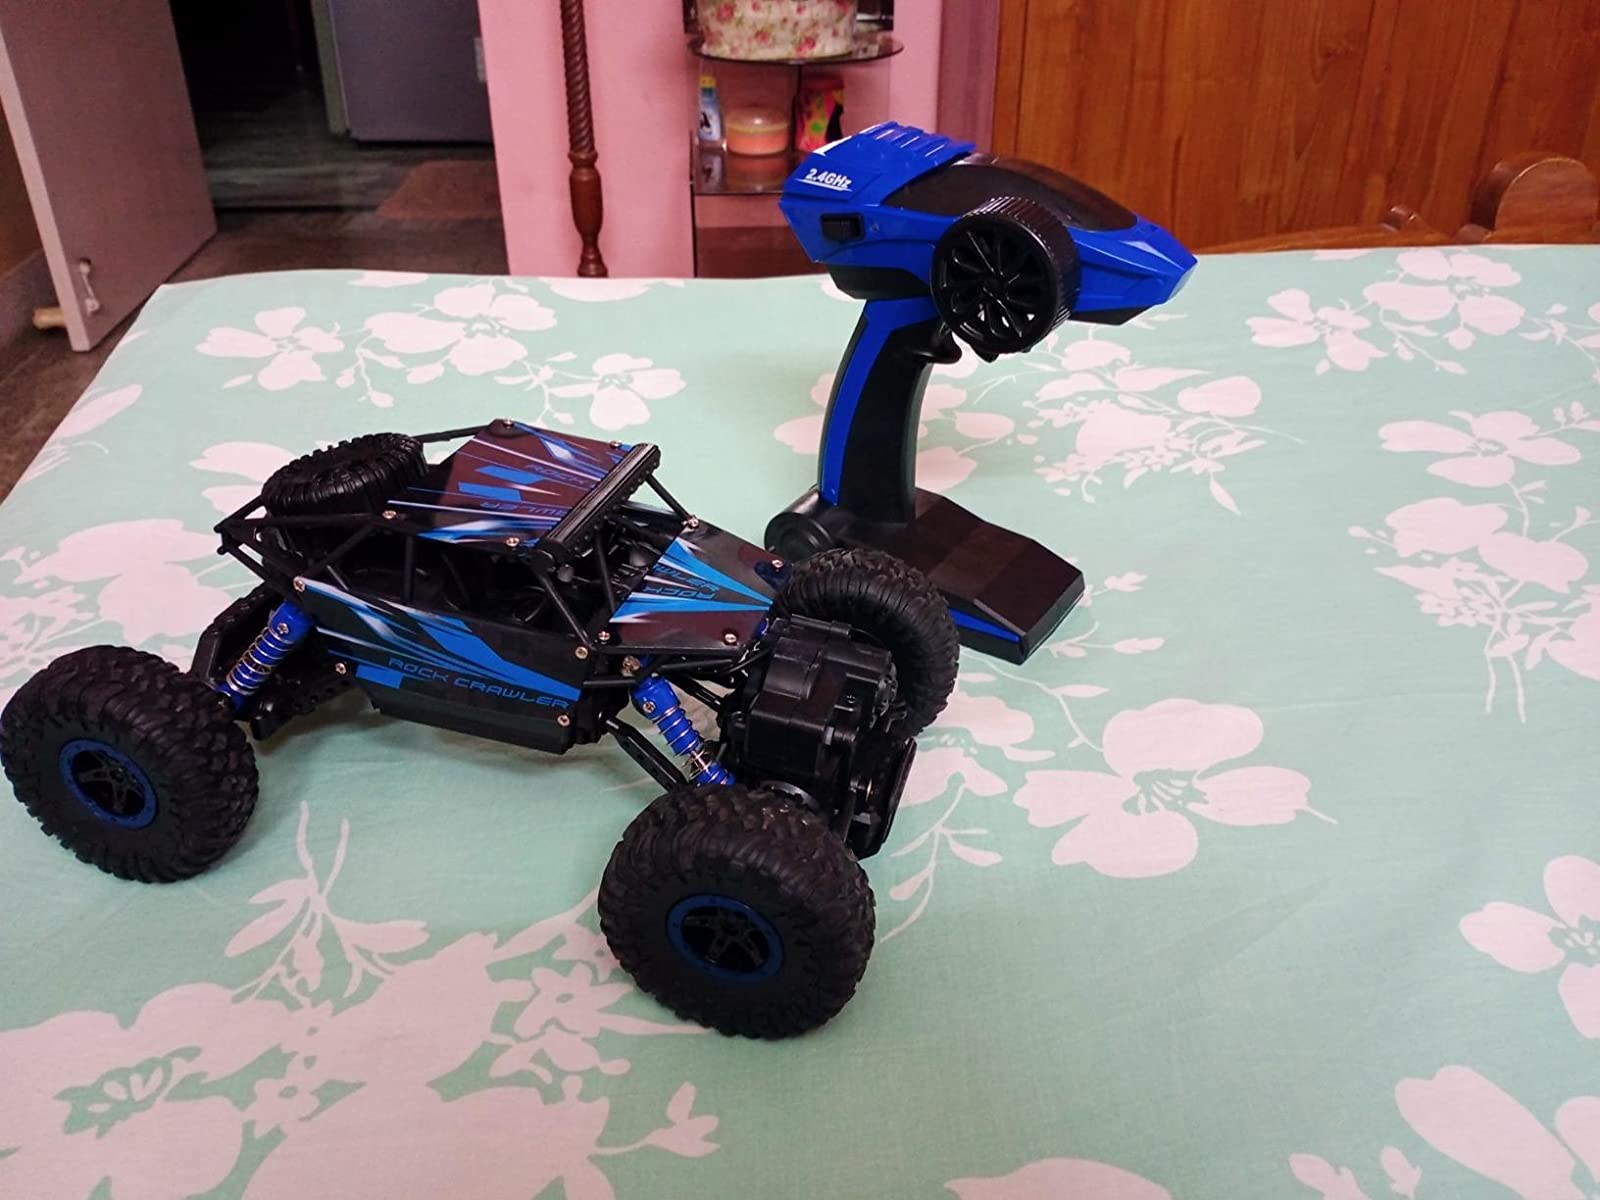 4Wd Rc Monster Truck 1/18 Crawler Car -Road Vehicle 2.4Ghz Remote Control Car photo review